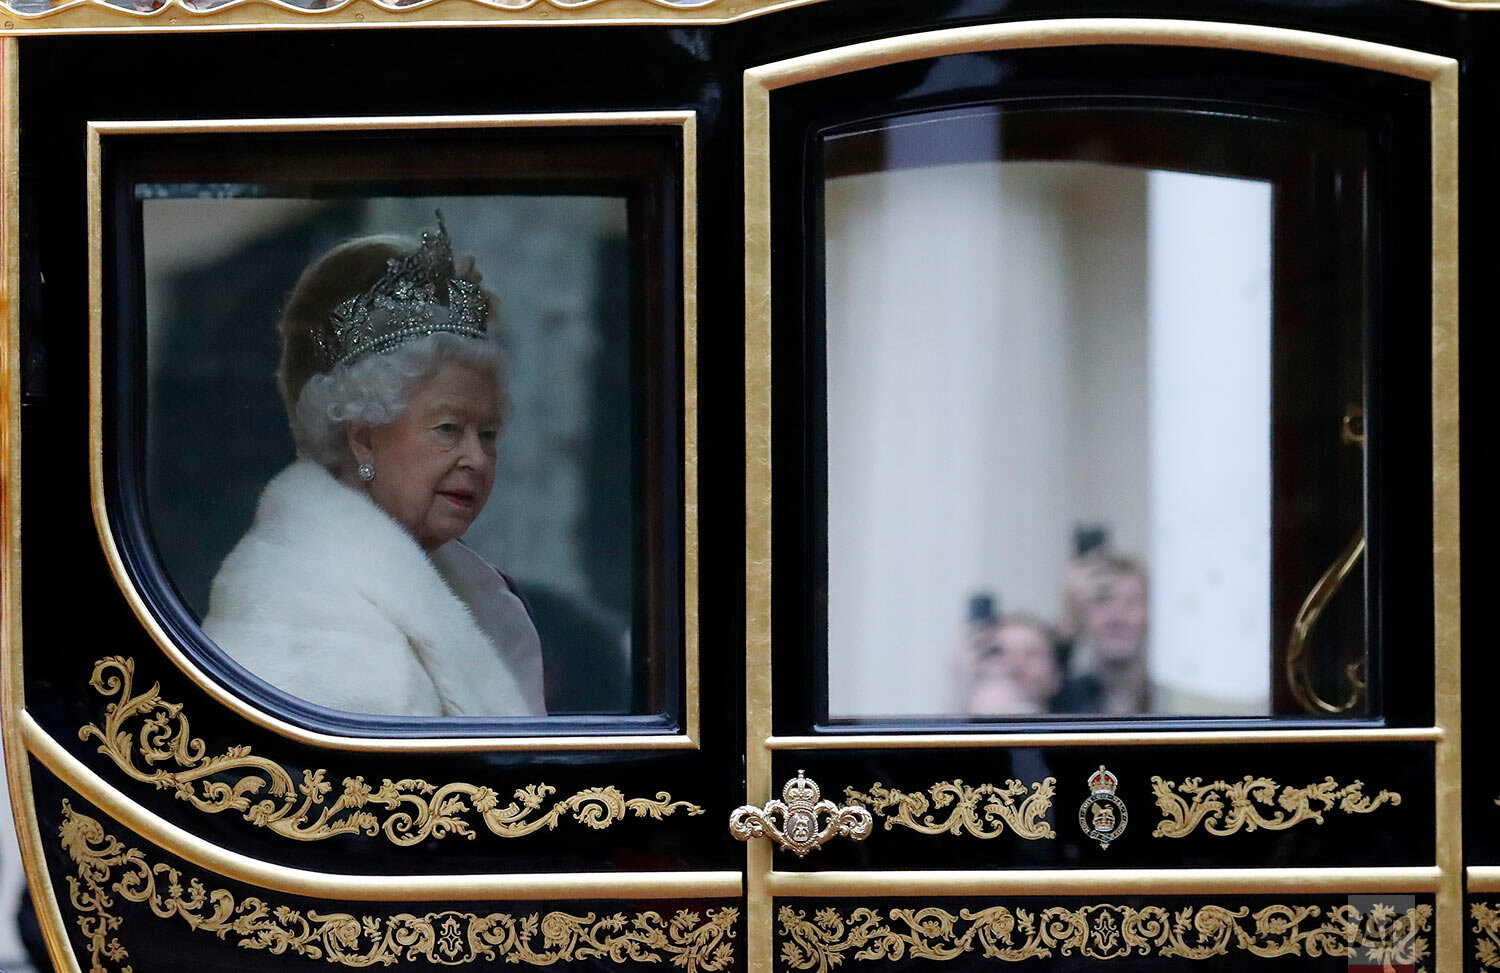  Britain's Queen Elizabeth II travels in a carriage to parliament for the official State Opening of Parliament in London, Monday, Oct. 14, 2019. (AP Photo/Frank Augstein) 